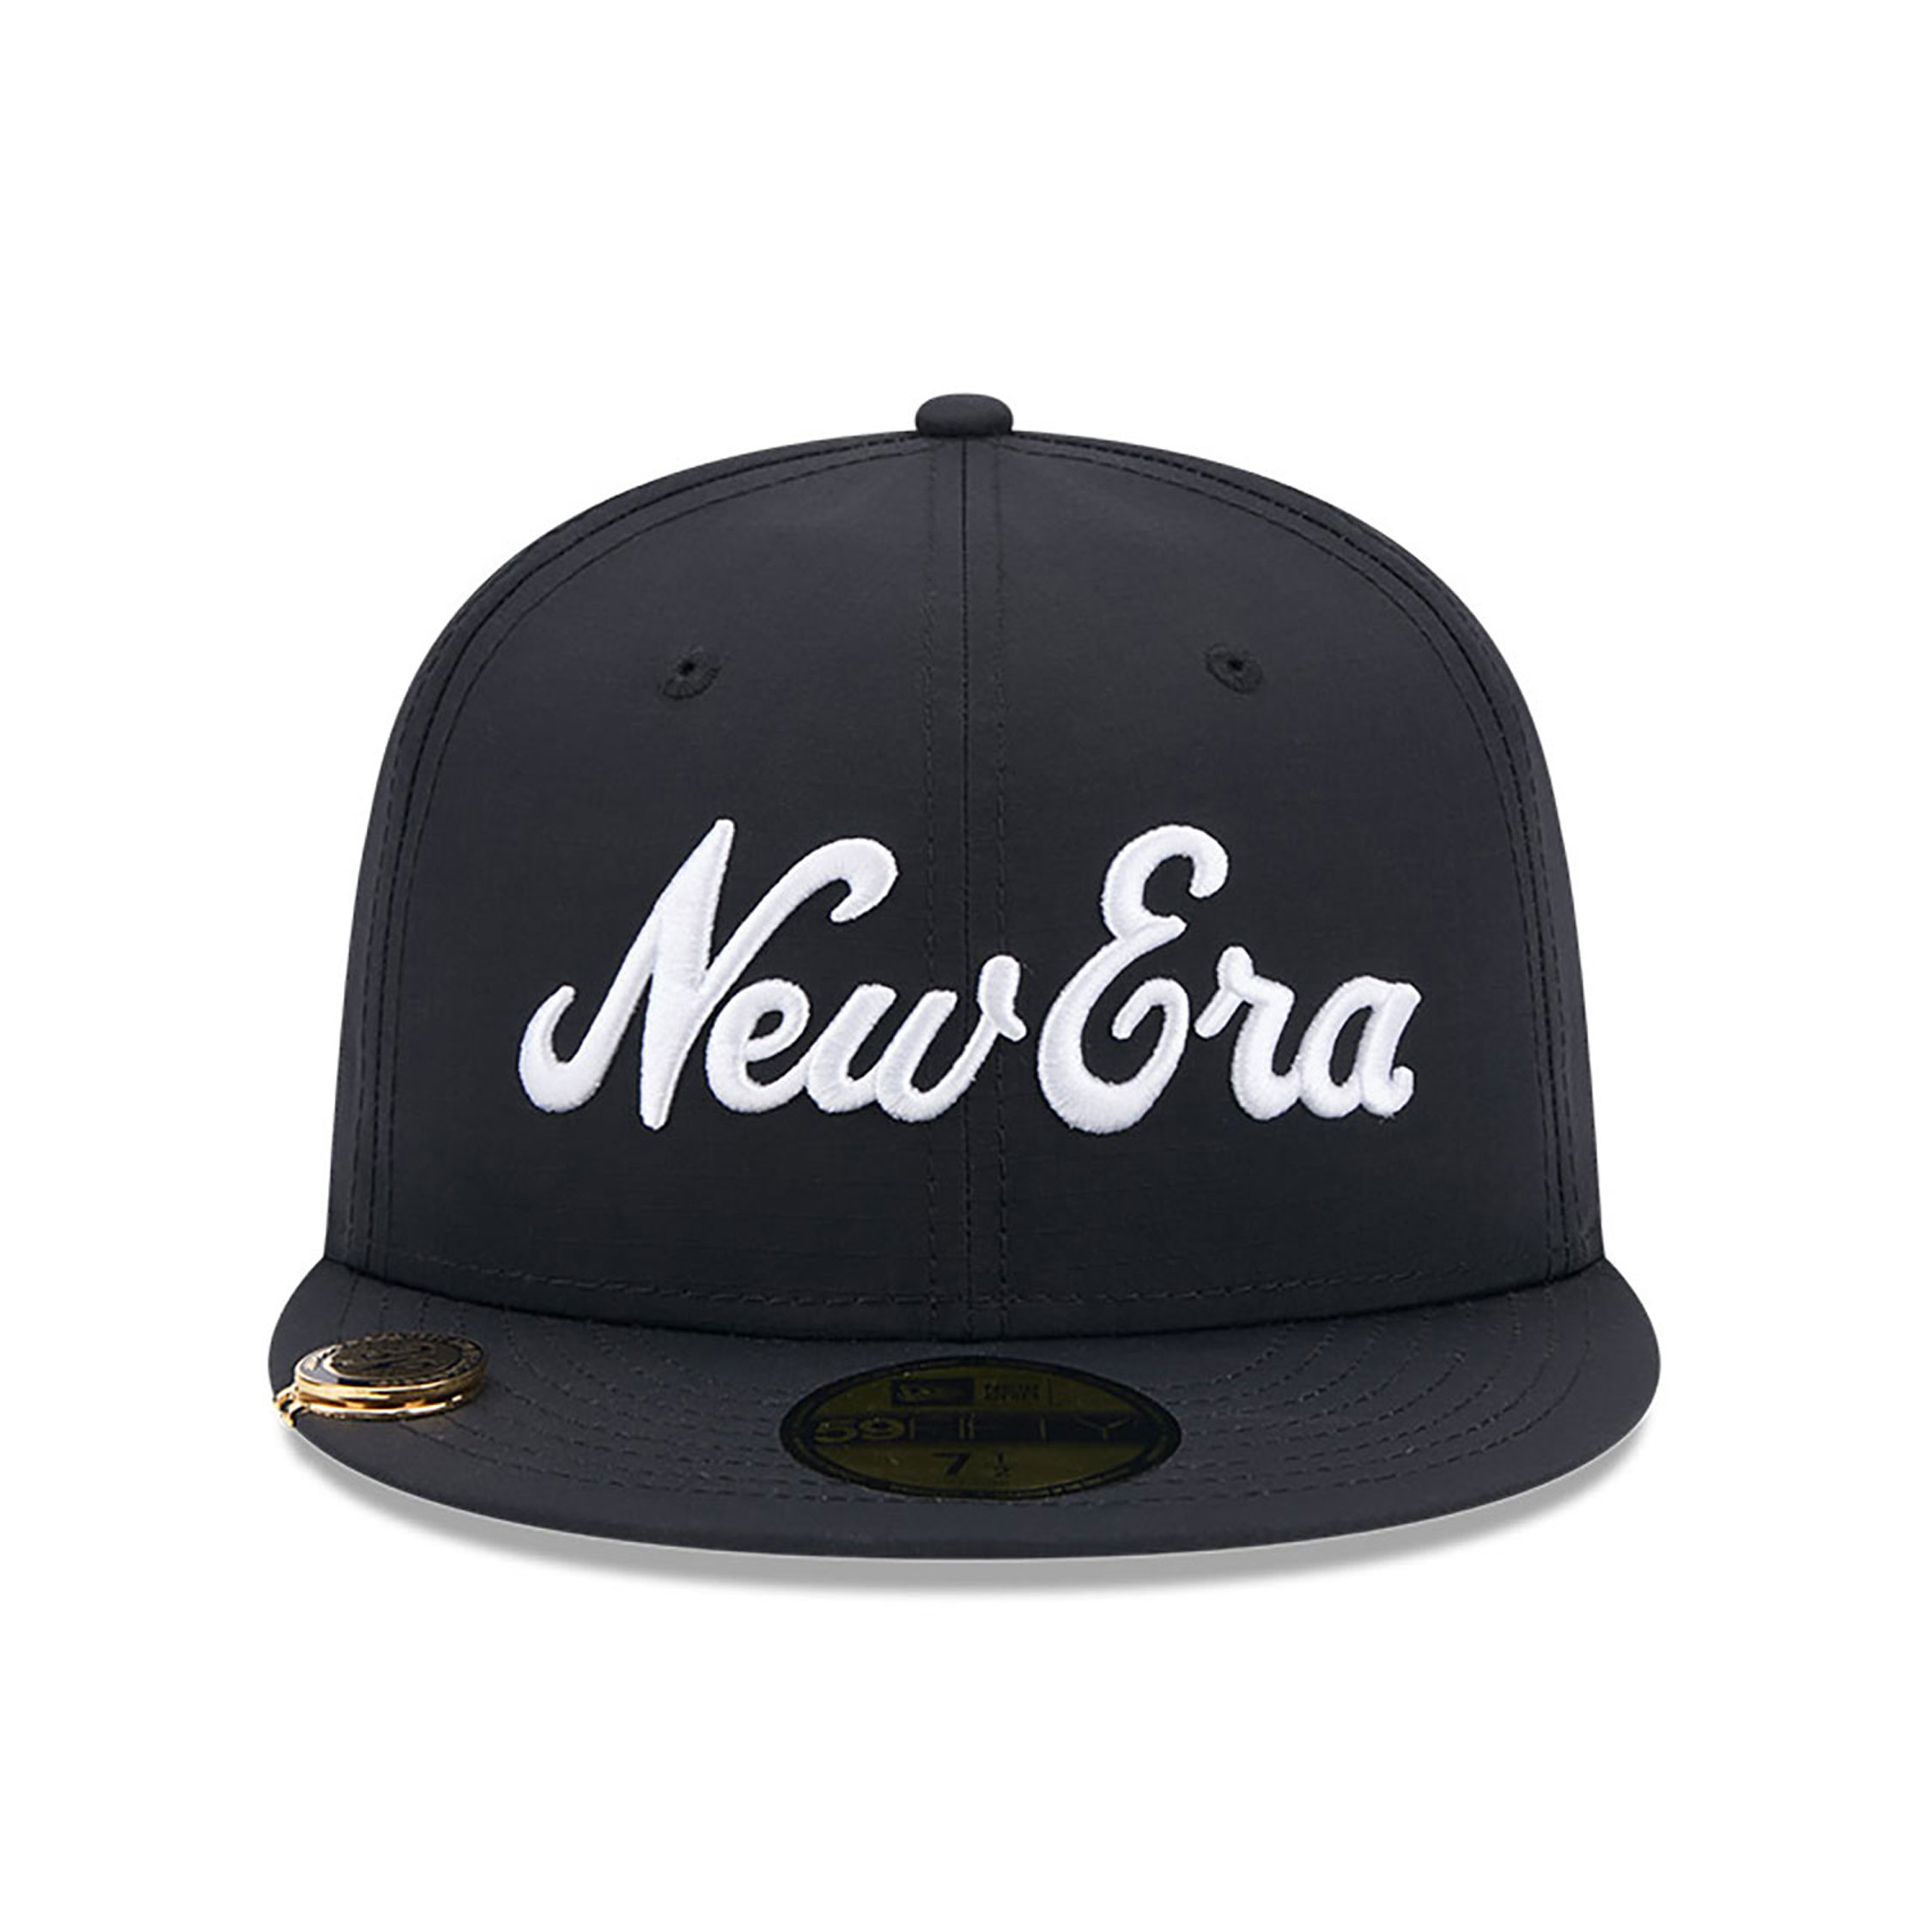 New Era Fairway Black 59FIFTY Fitted Cap